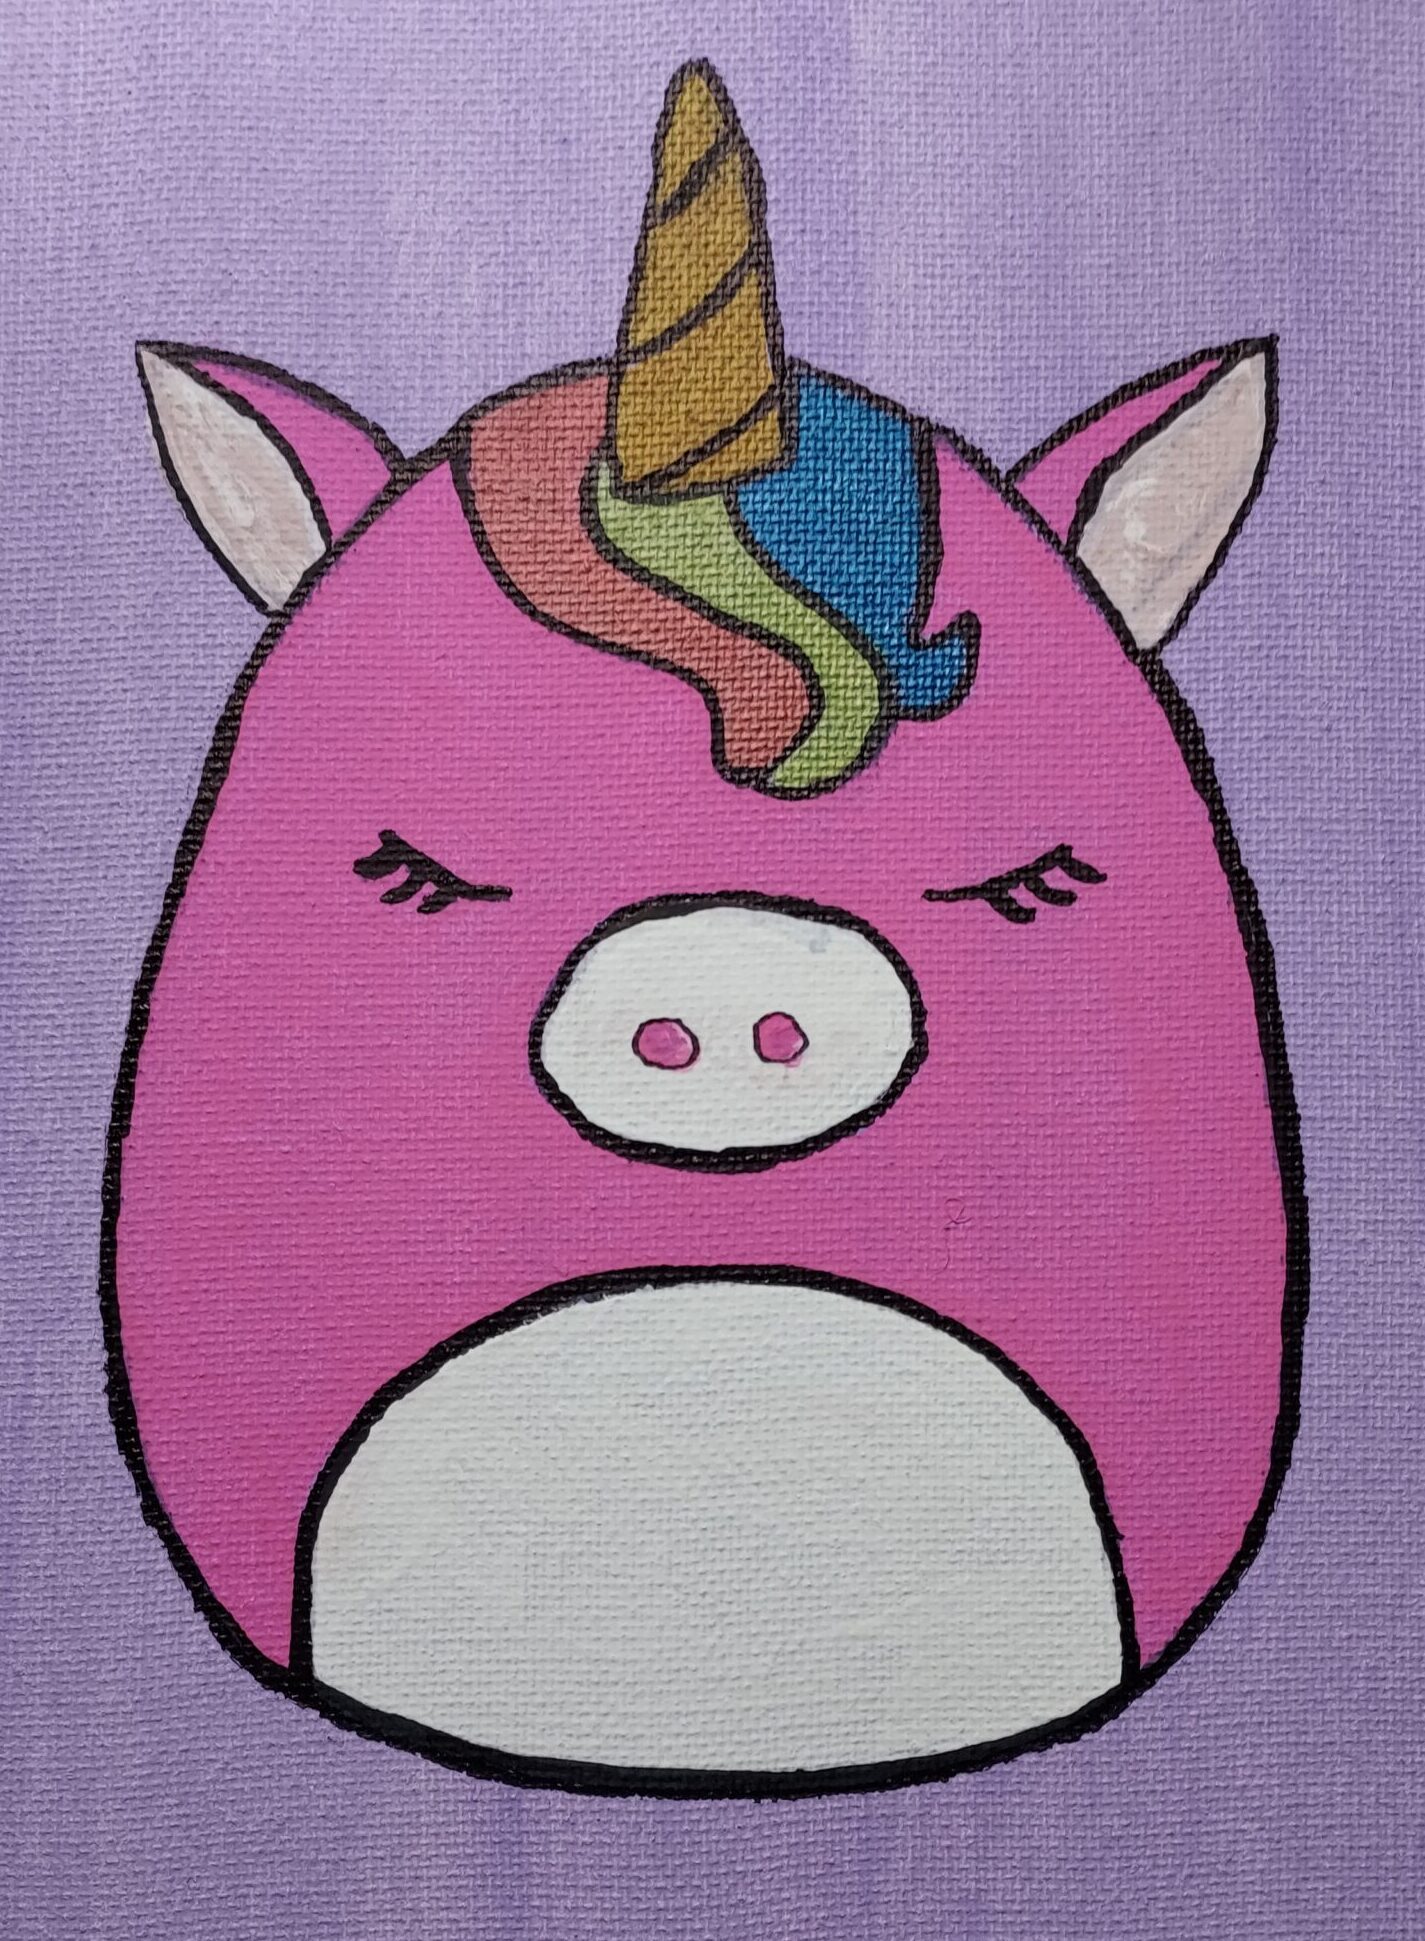 Tues., July 16th @ 11:30am Squishmallow Painting